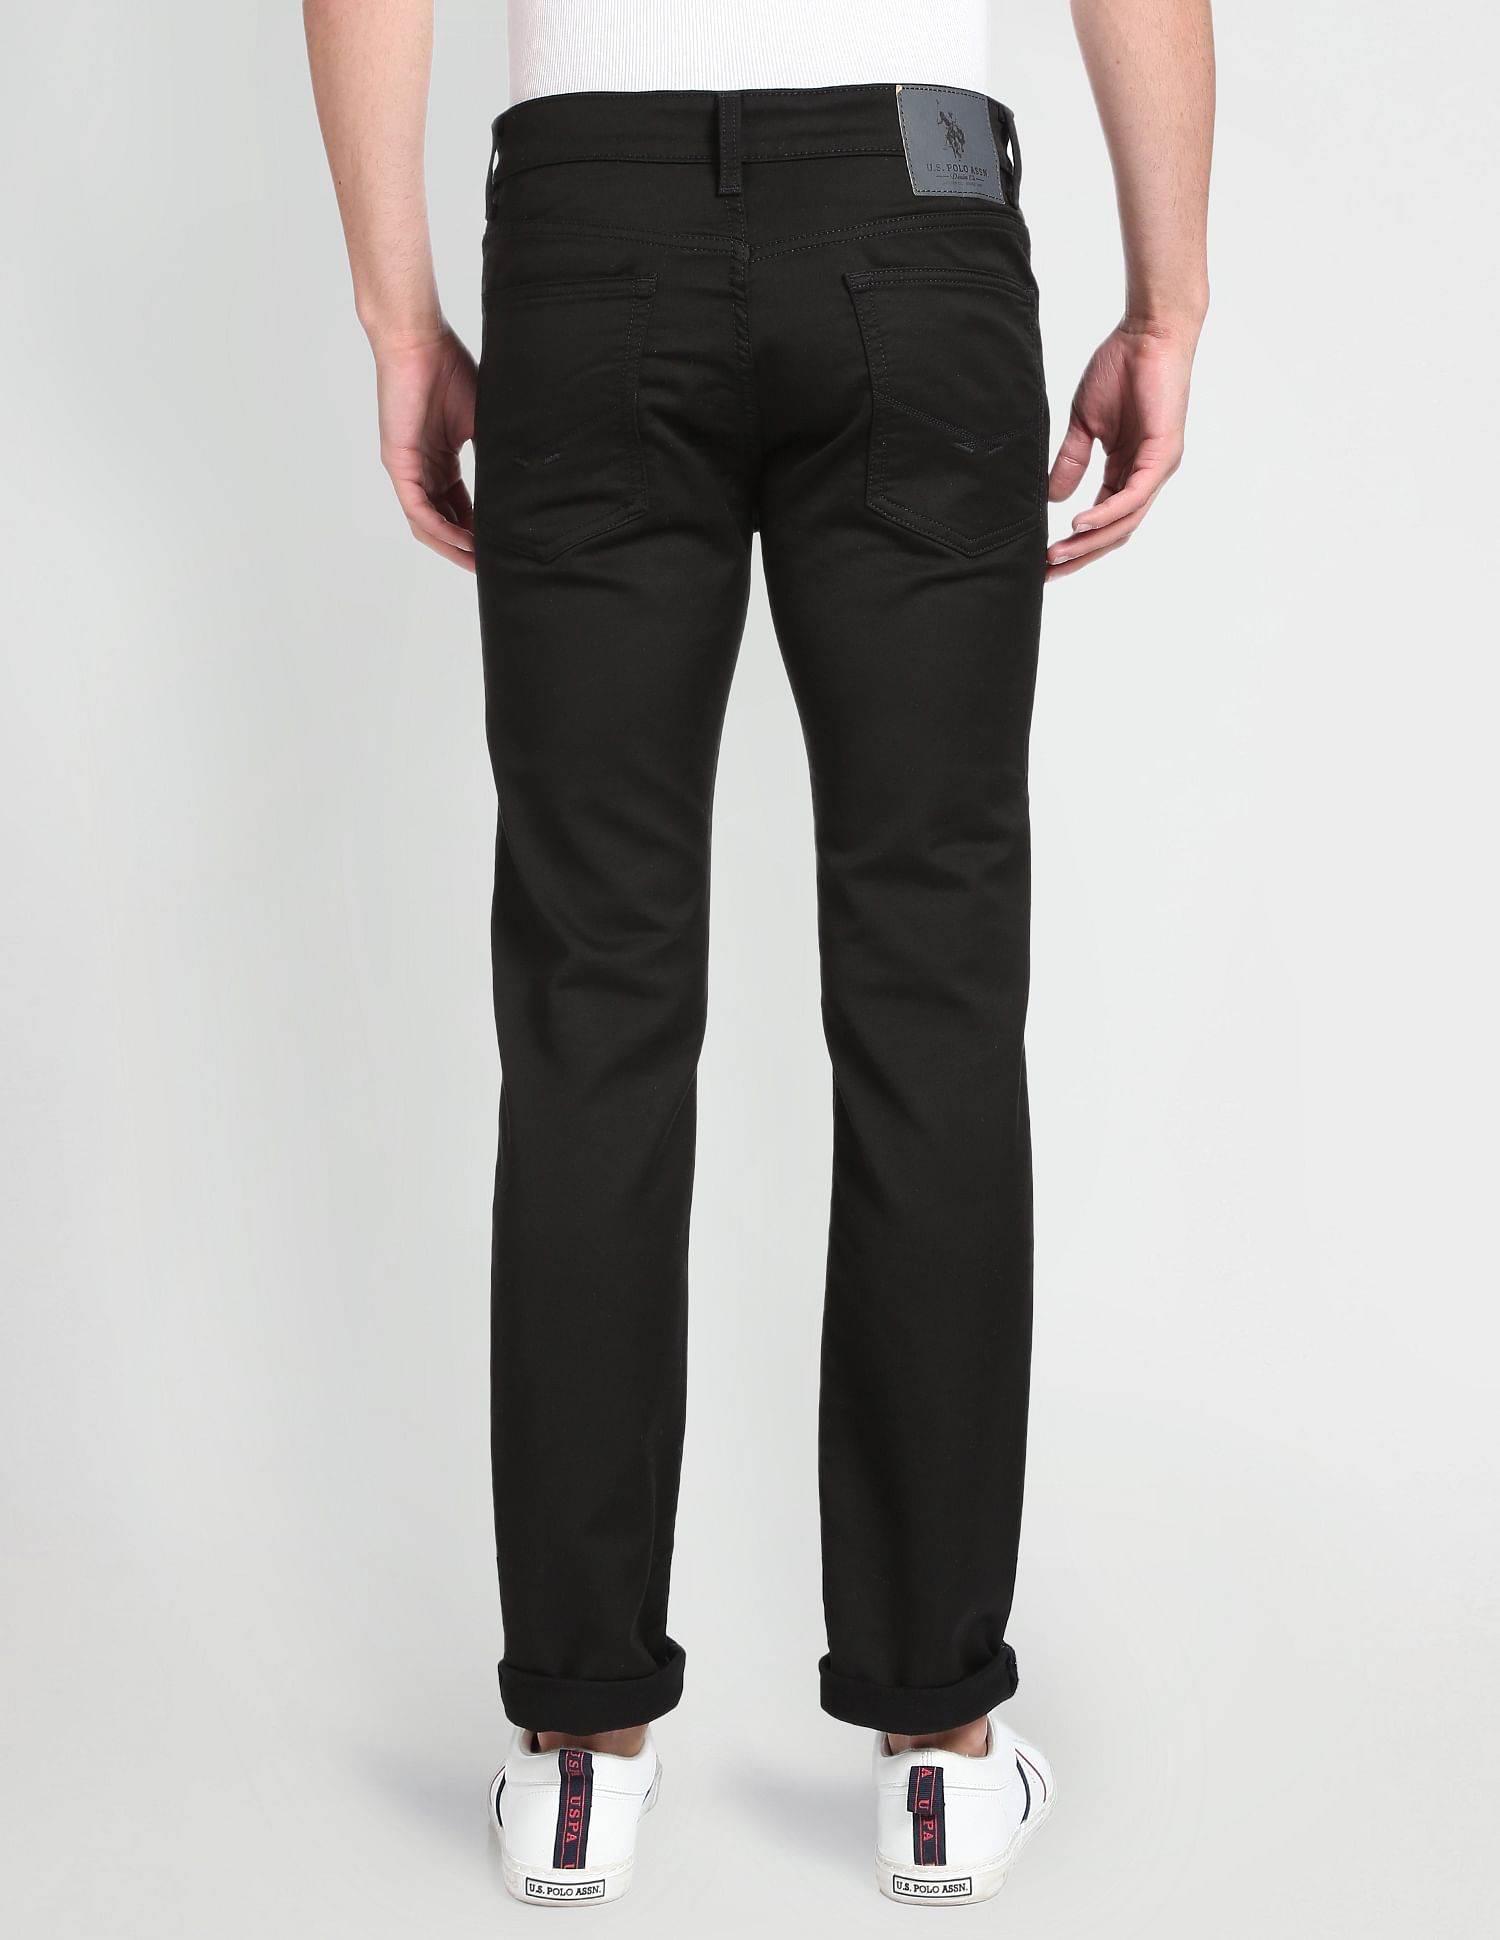 Best Black Skinny Fit Jeans – U.S. Polo Assn. India